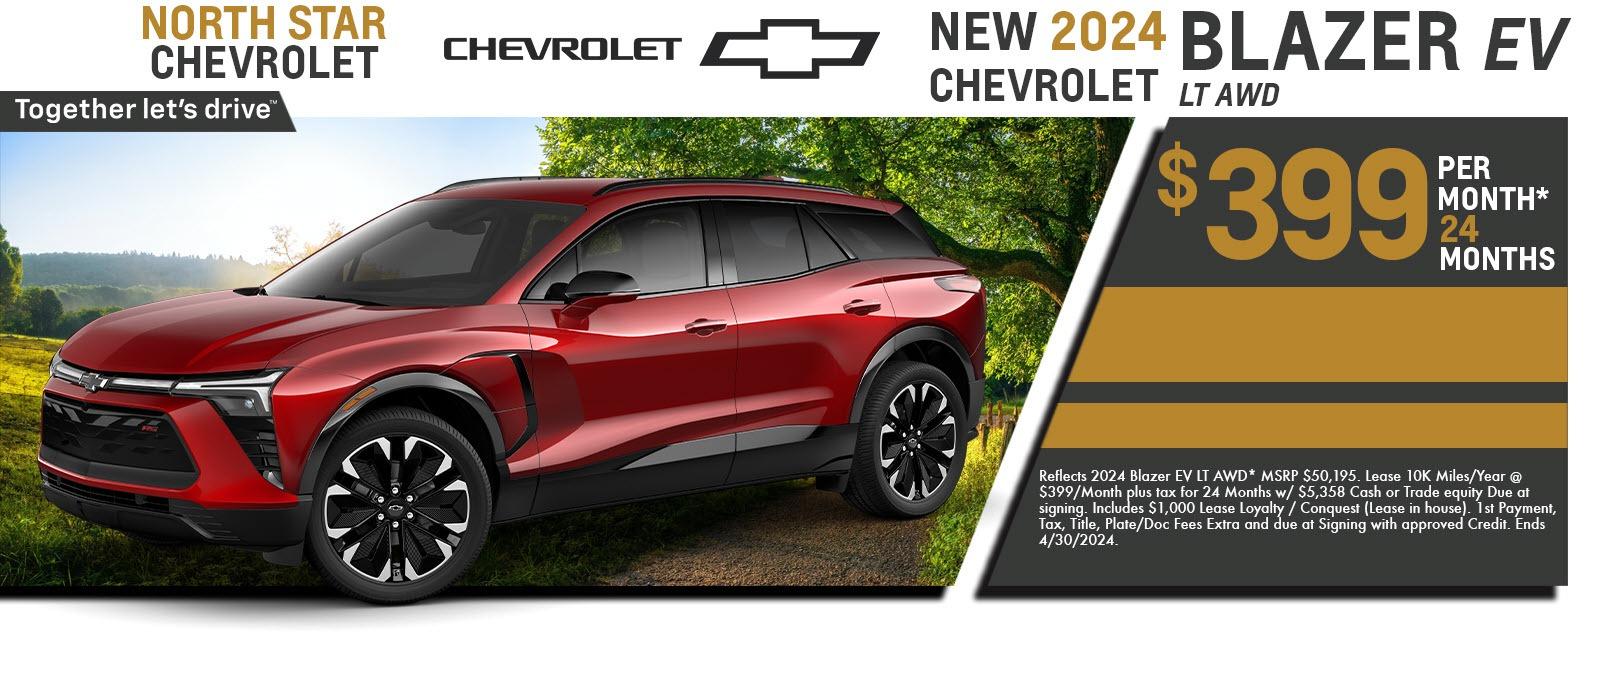 2024 Chevy Blazer EV lease for $399 Per month for 24 months